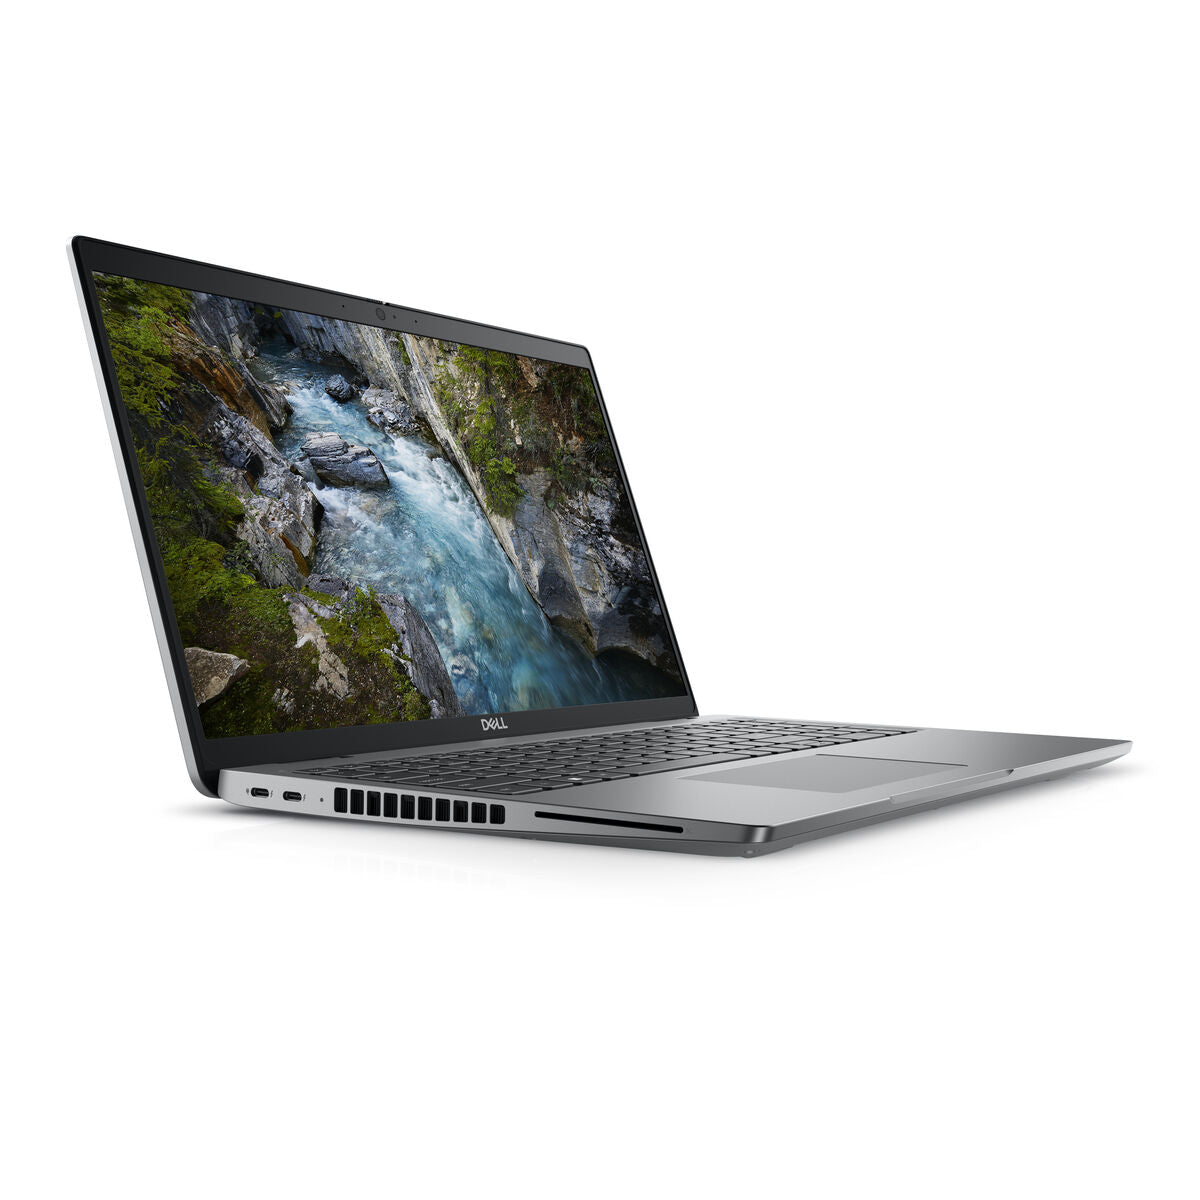 Laptop Dell I7-13700H 512 GB SSD Spanish Qwerty